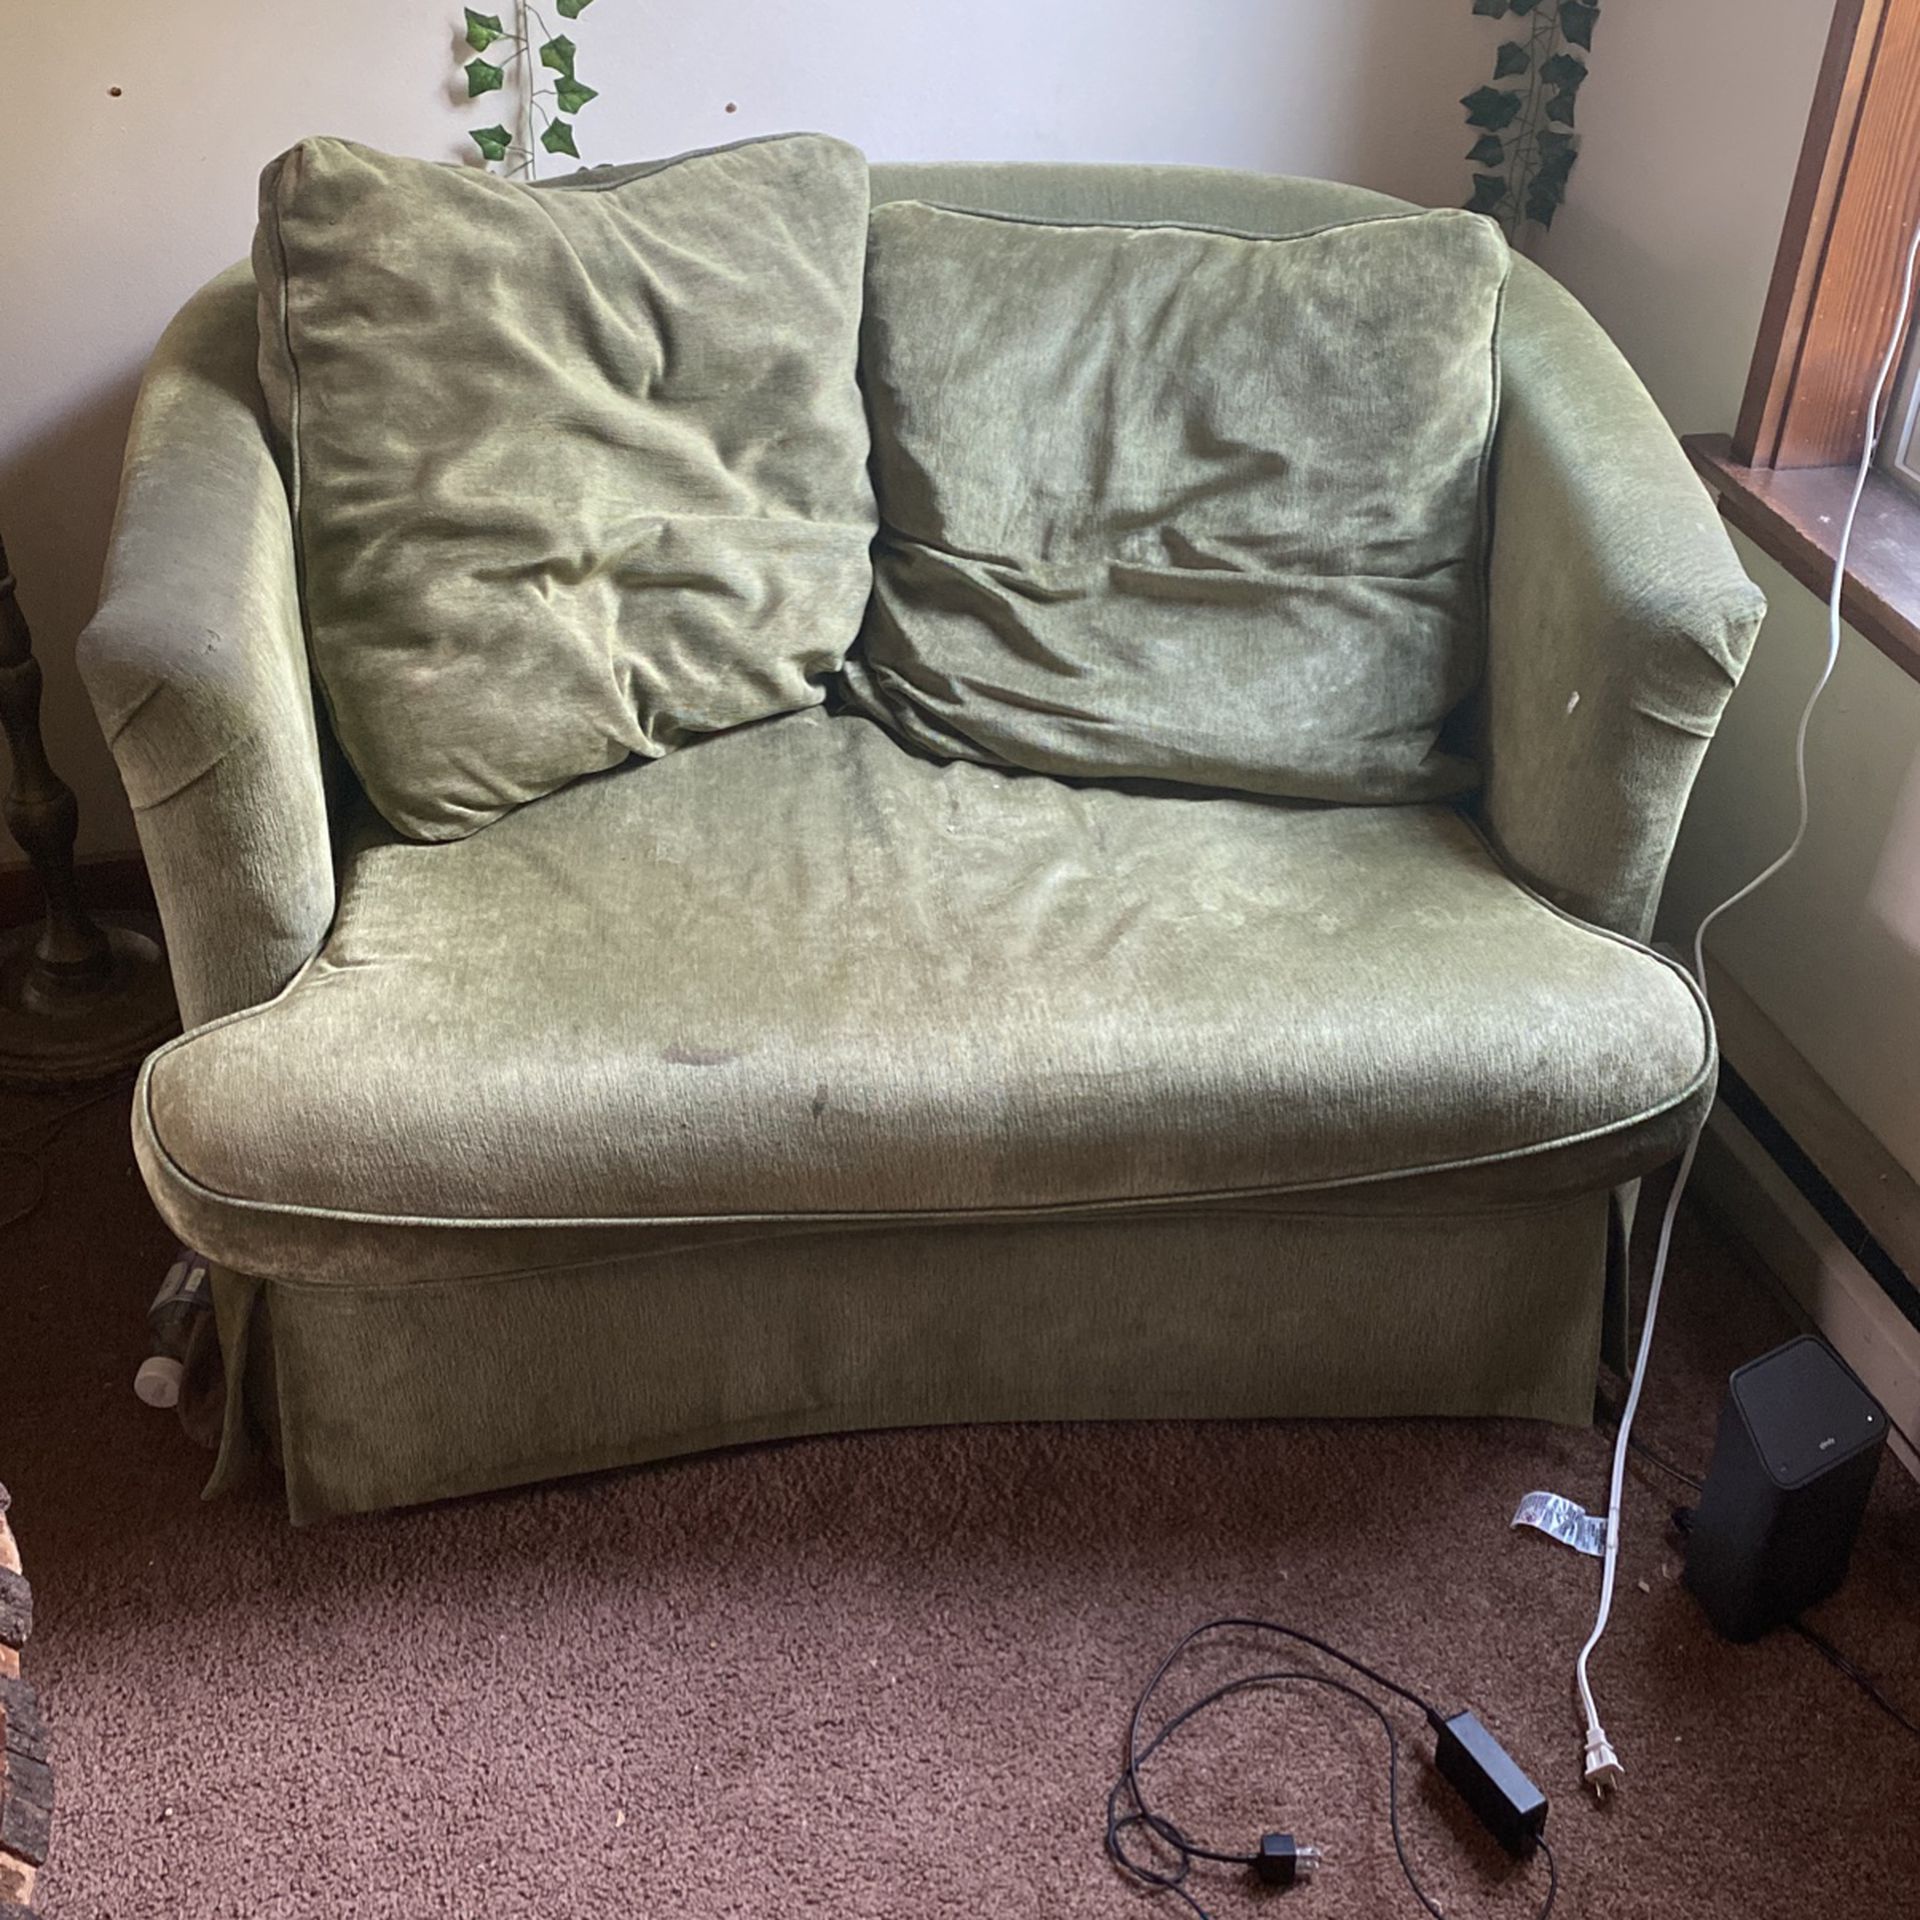 Green couch 